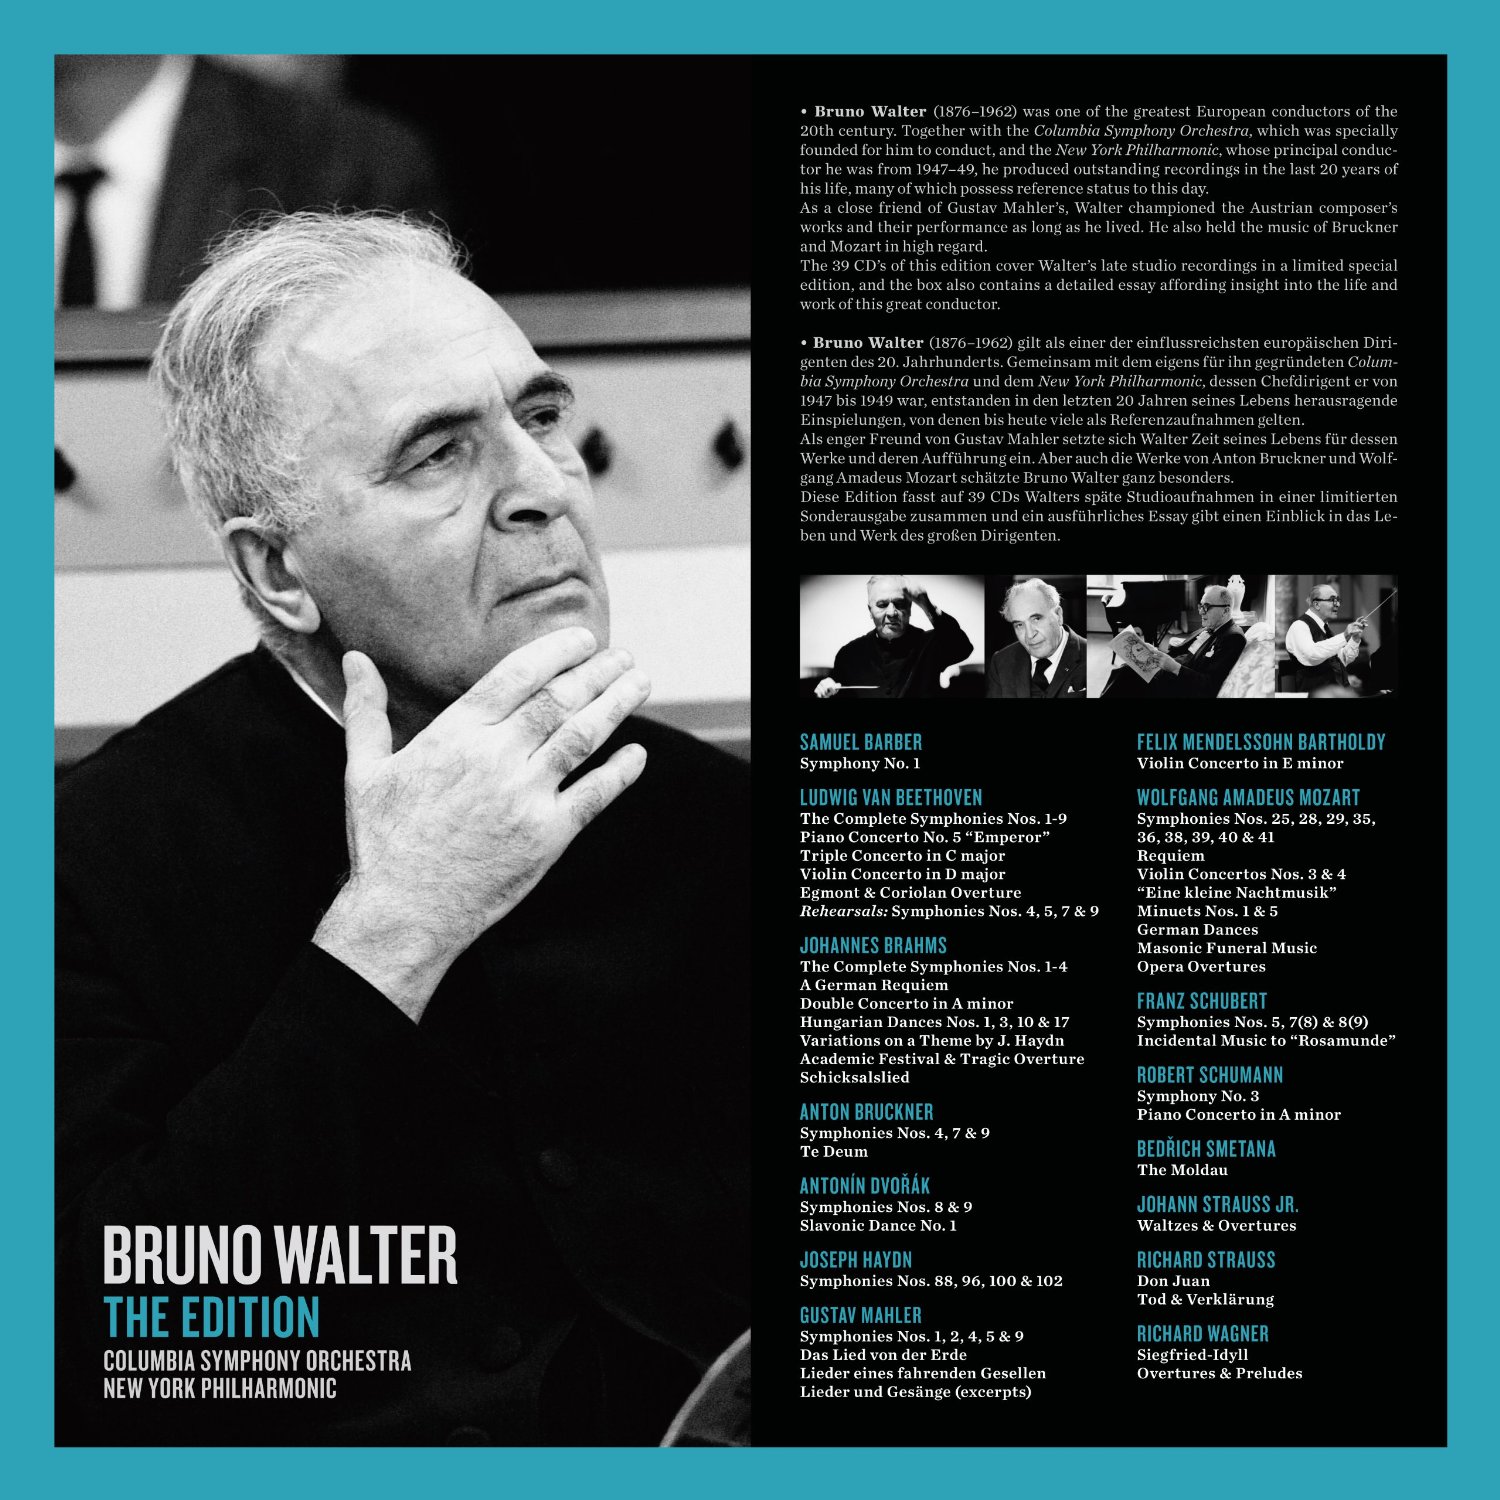 Bruno Walter's new 39 CD with Columbia Symphony Orchestra & New York Philharmonic